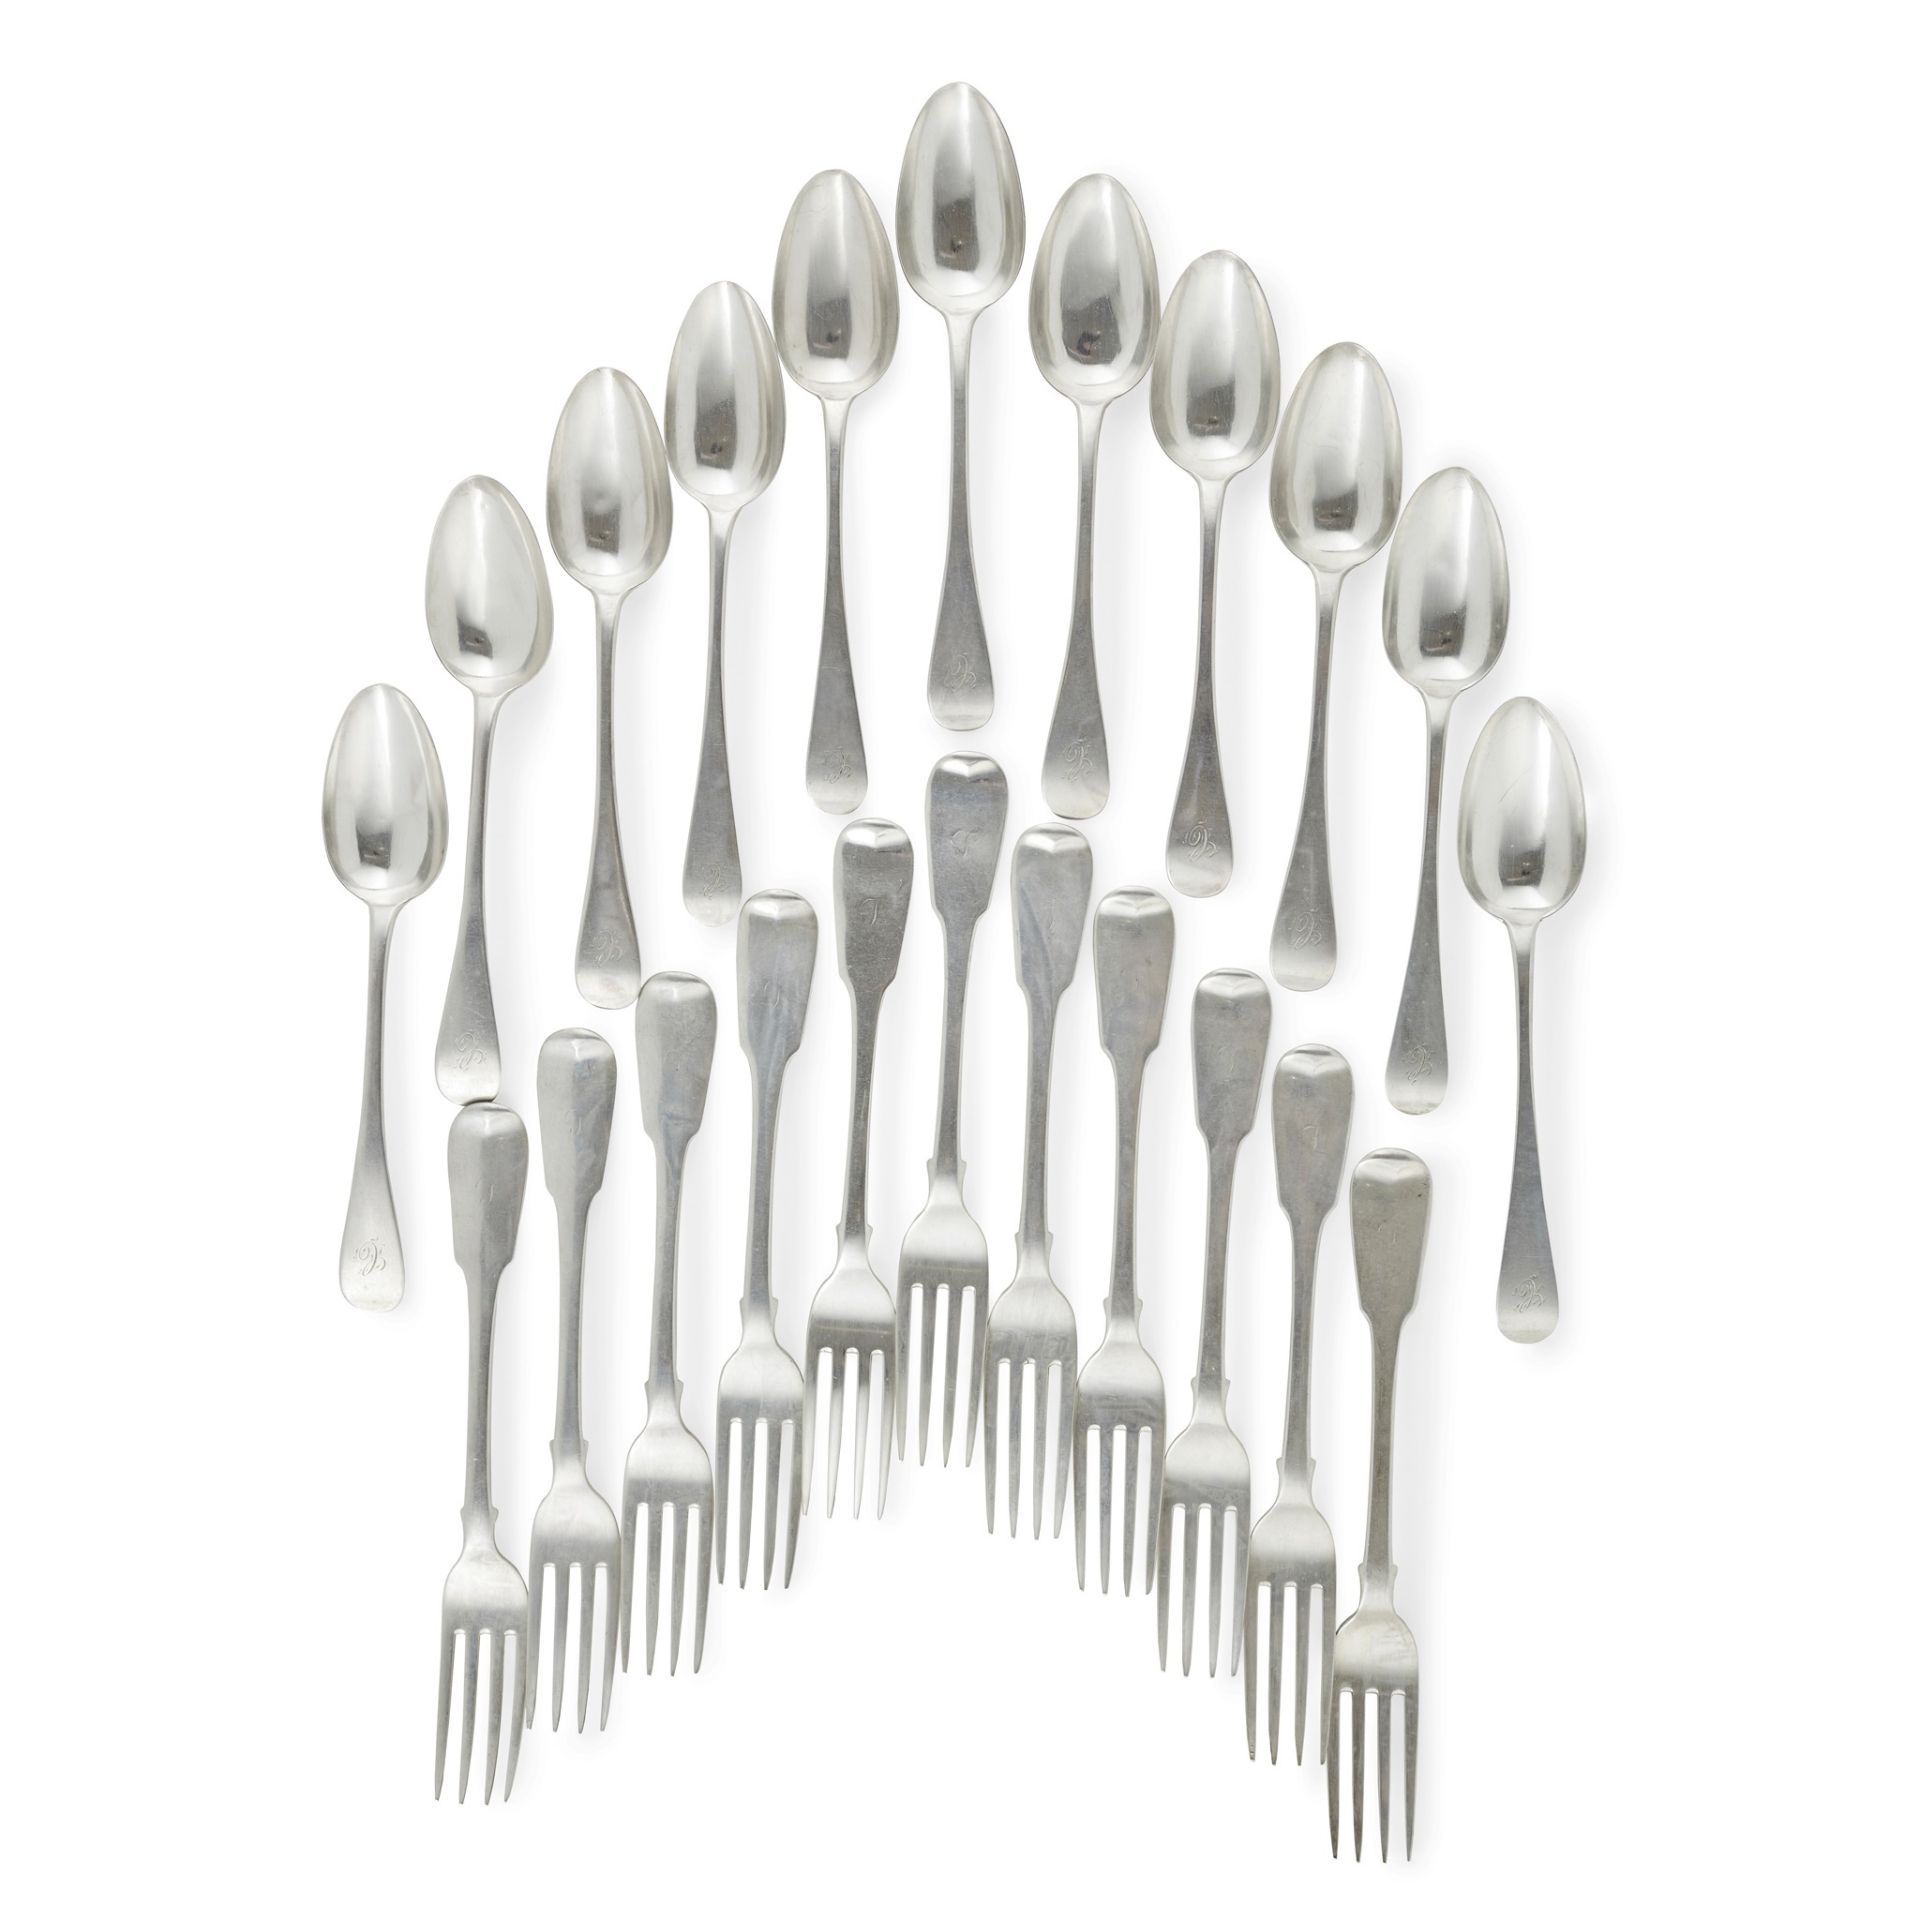 Dundee - A collection of Scottish provincial flatware